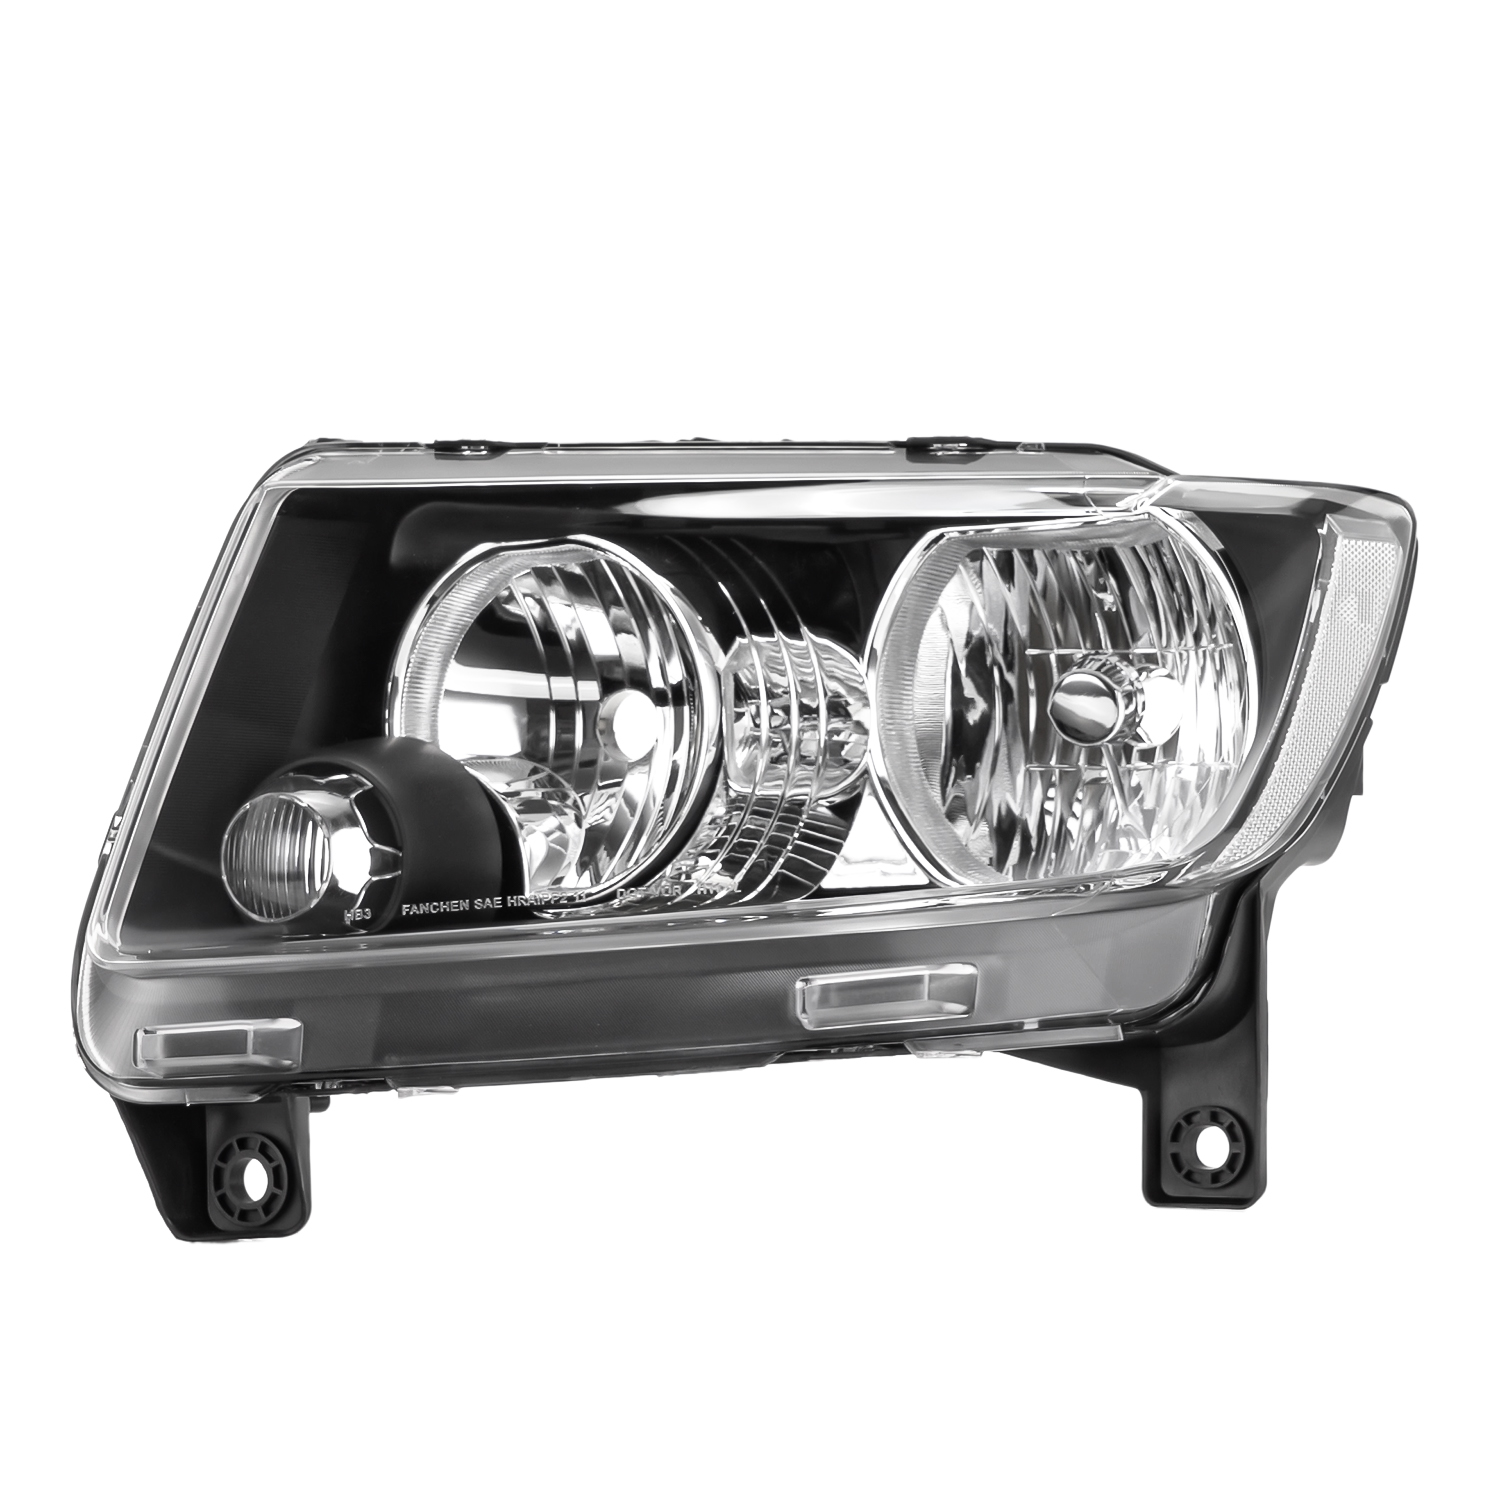 M-AUTO Headlights Assembly Left+Right Replacement for 2011 2012